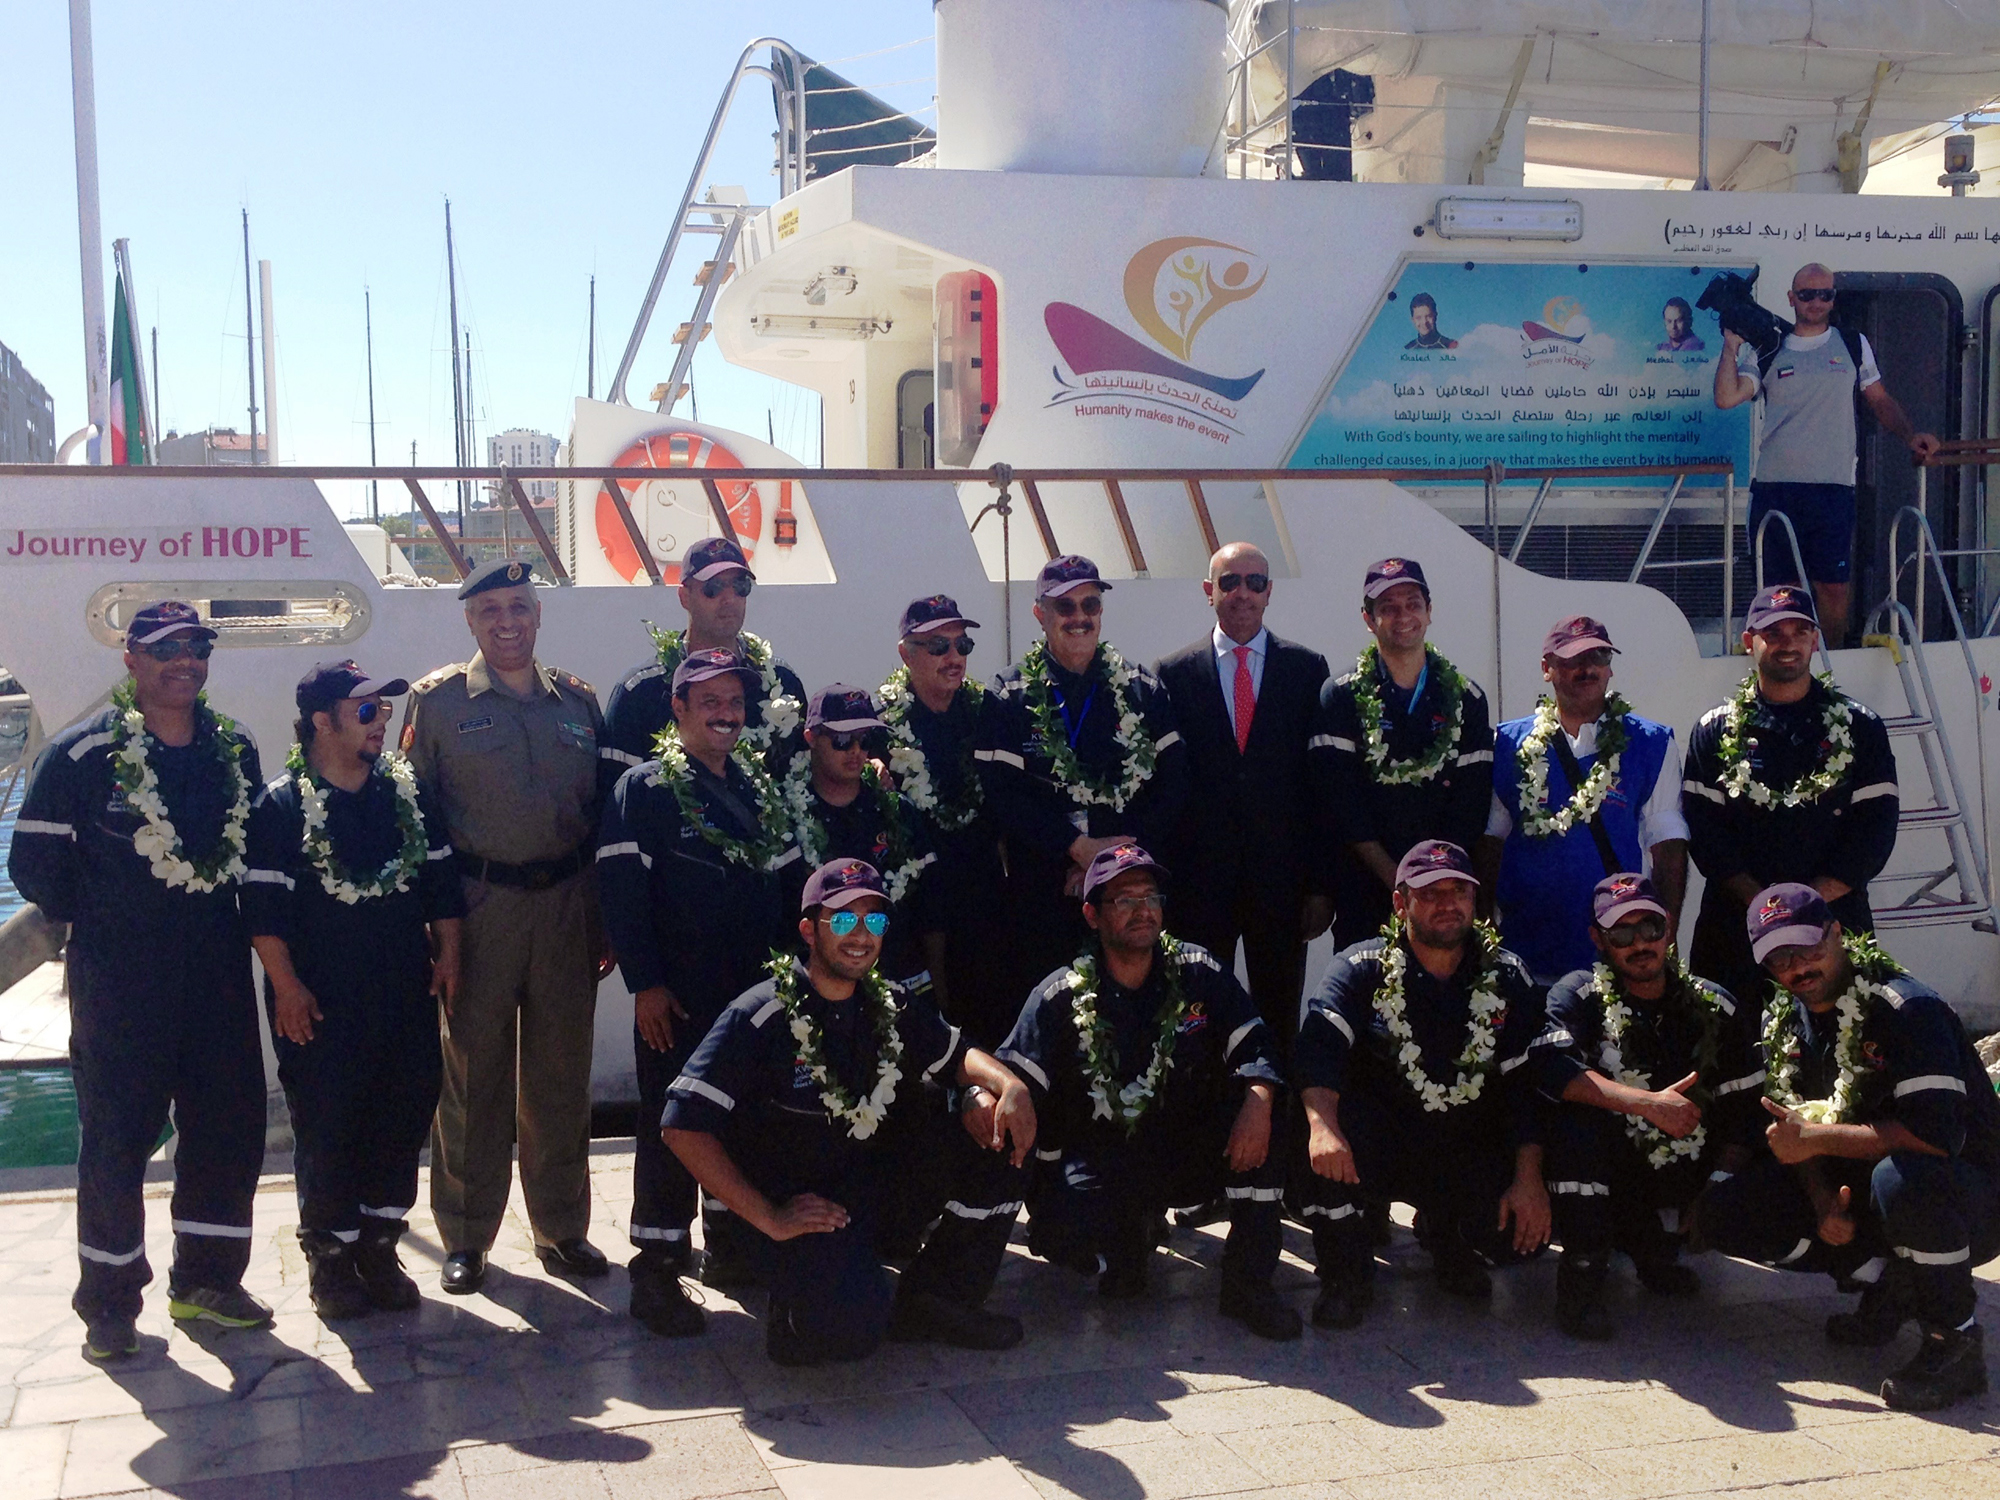 Kuwait's consul in Paris Muhammad Al-Shamlan and staff of the Kuwaiti embassy receive the mission of the "Journey of Hope" boat.